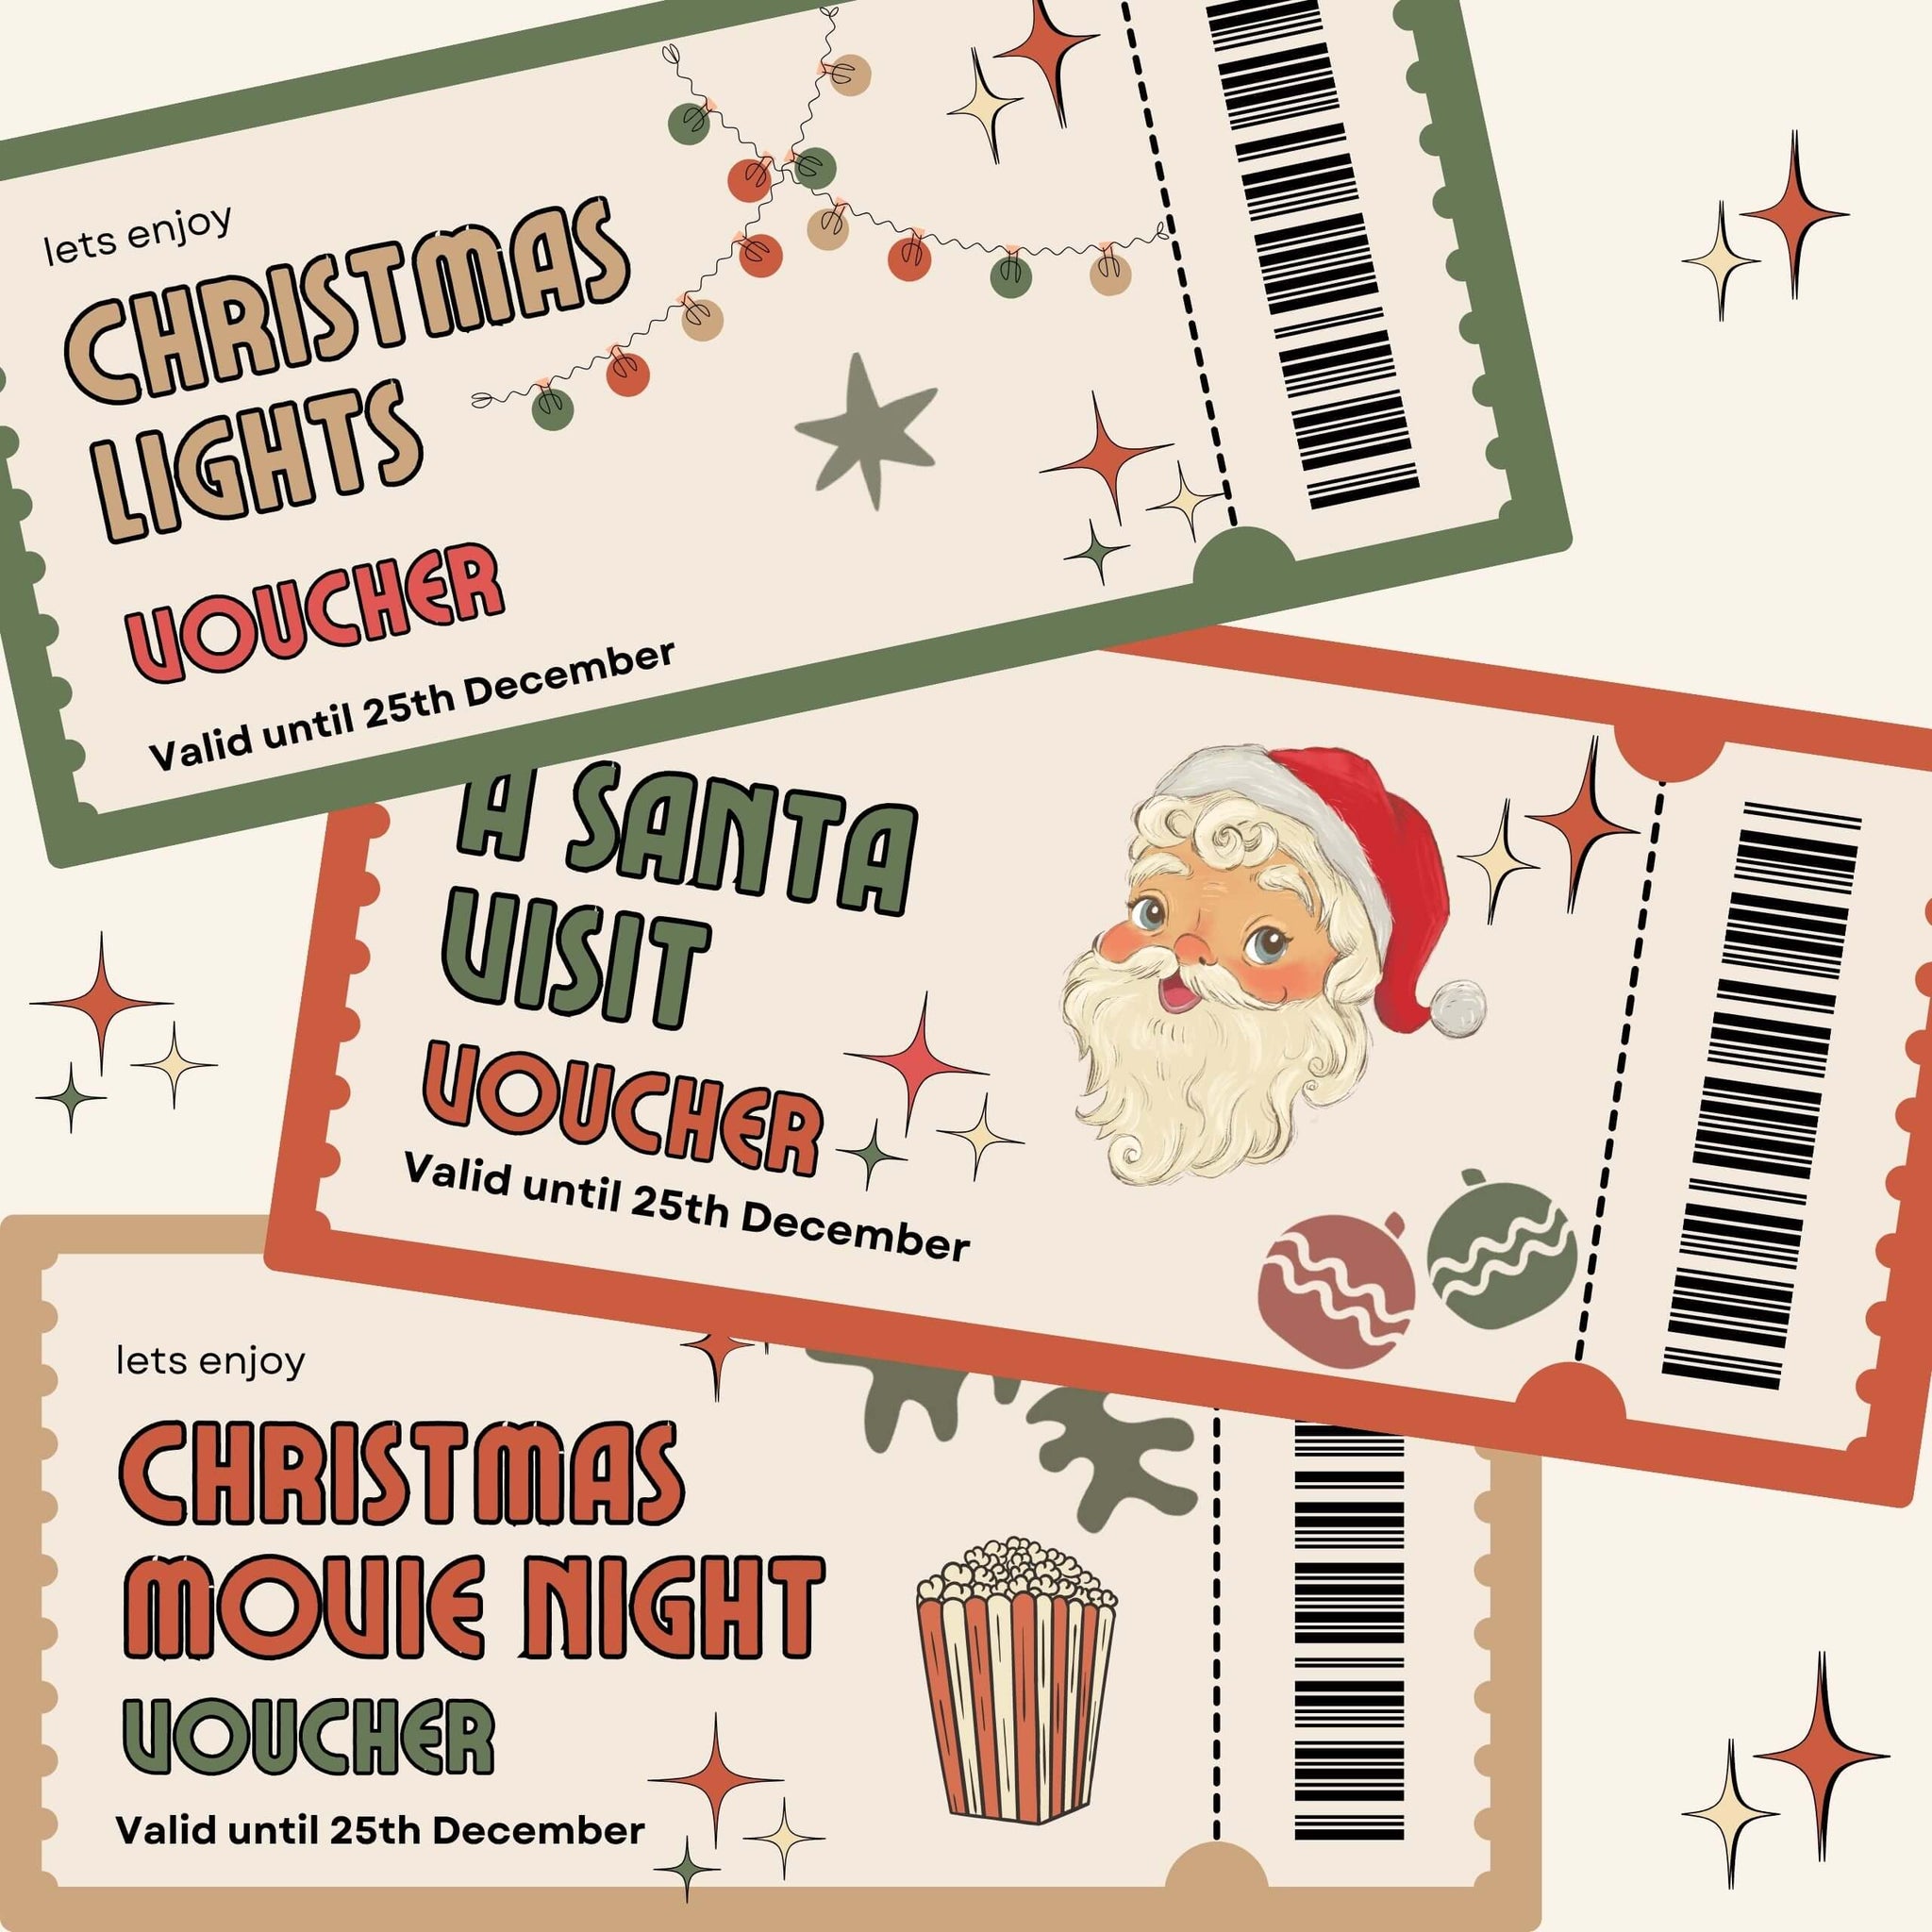 Free christmas vouchers to Download and print at home